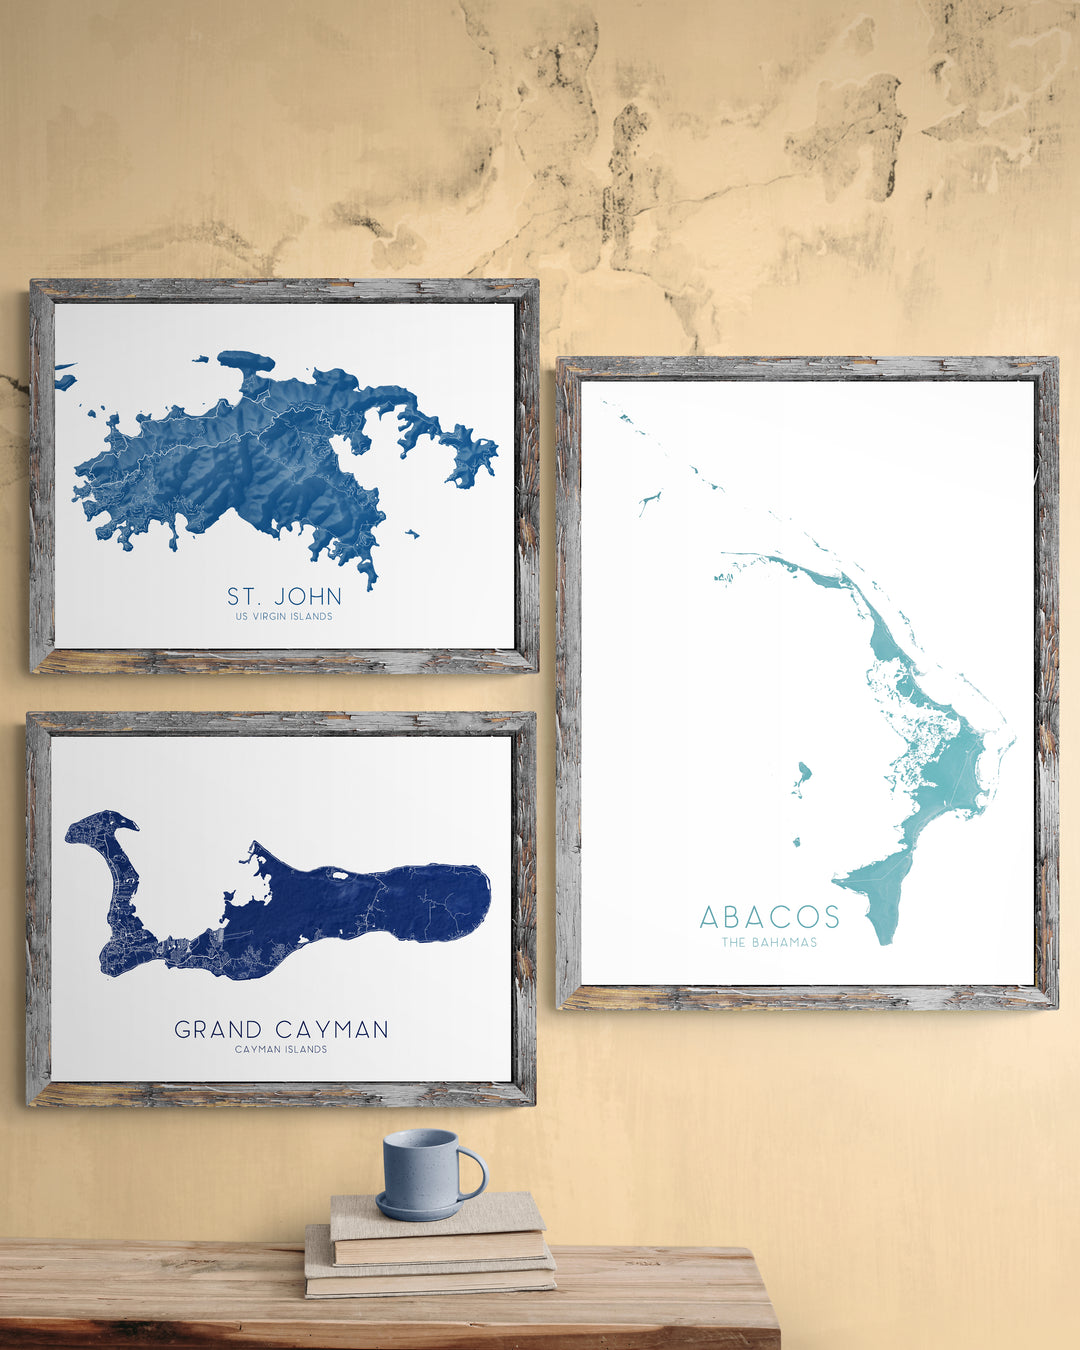 Caribbean islands map prints and posters by Maps As Art.